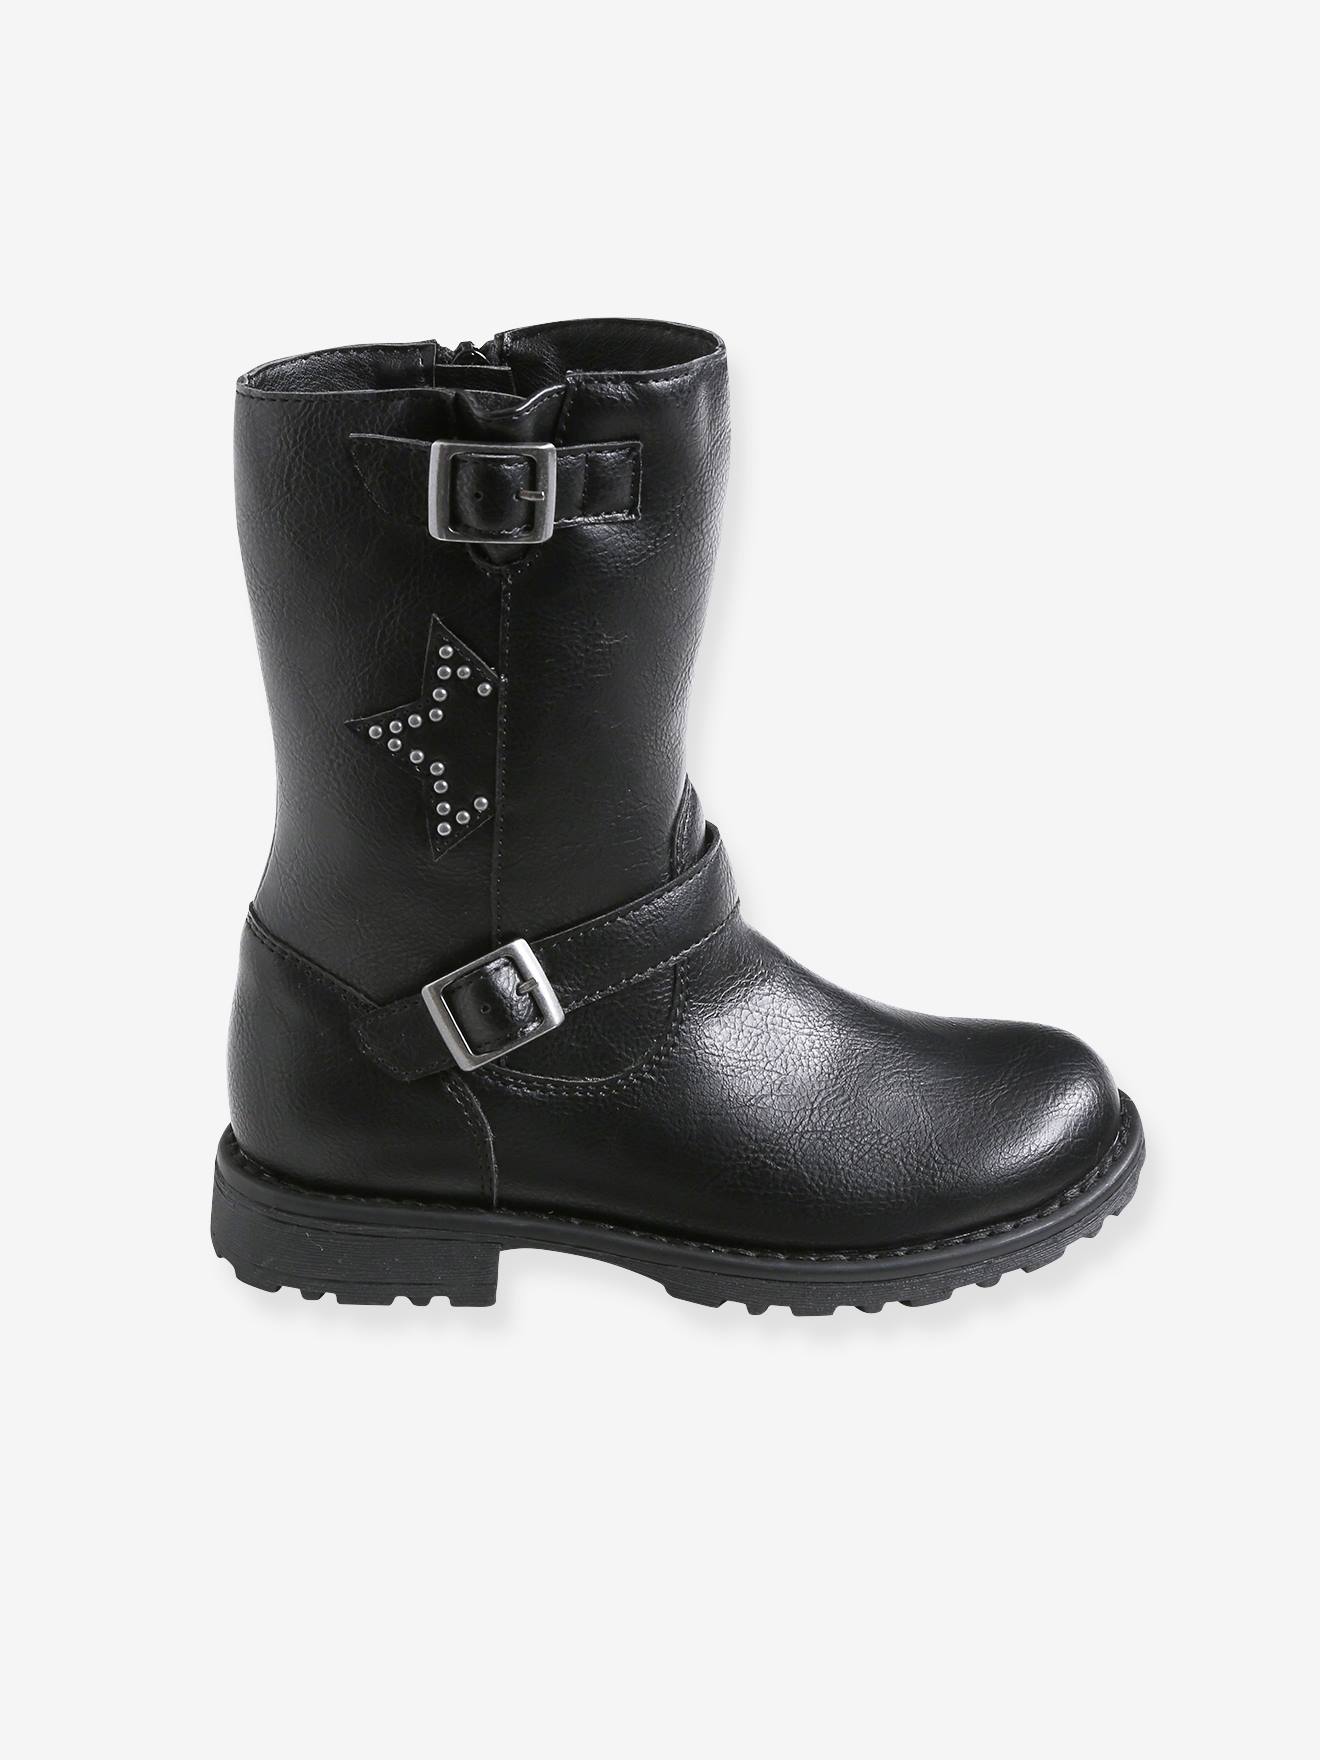 Assume Glimpse Any time Biker-Style Boots, for Girls - black, Shoes